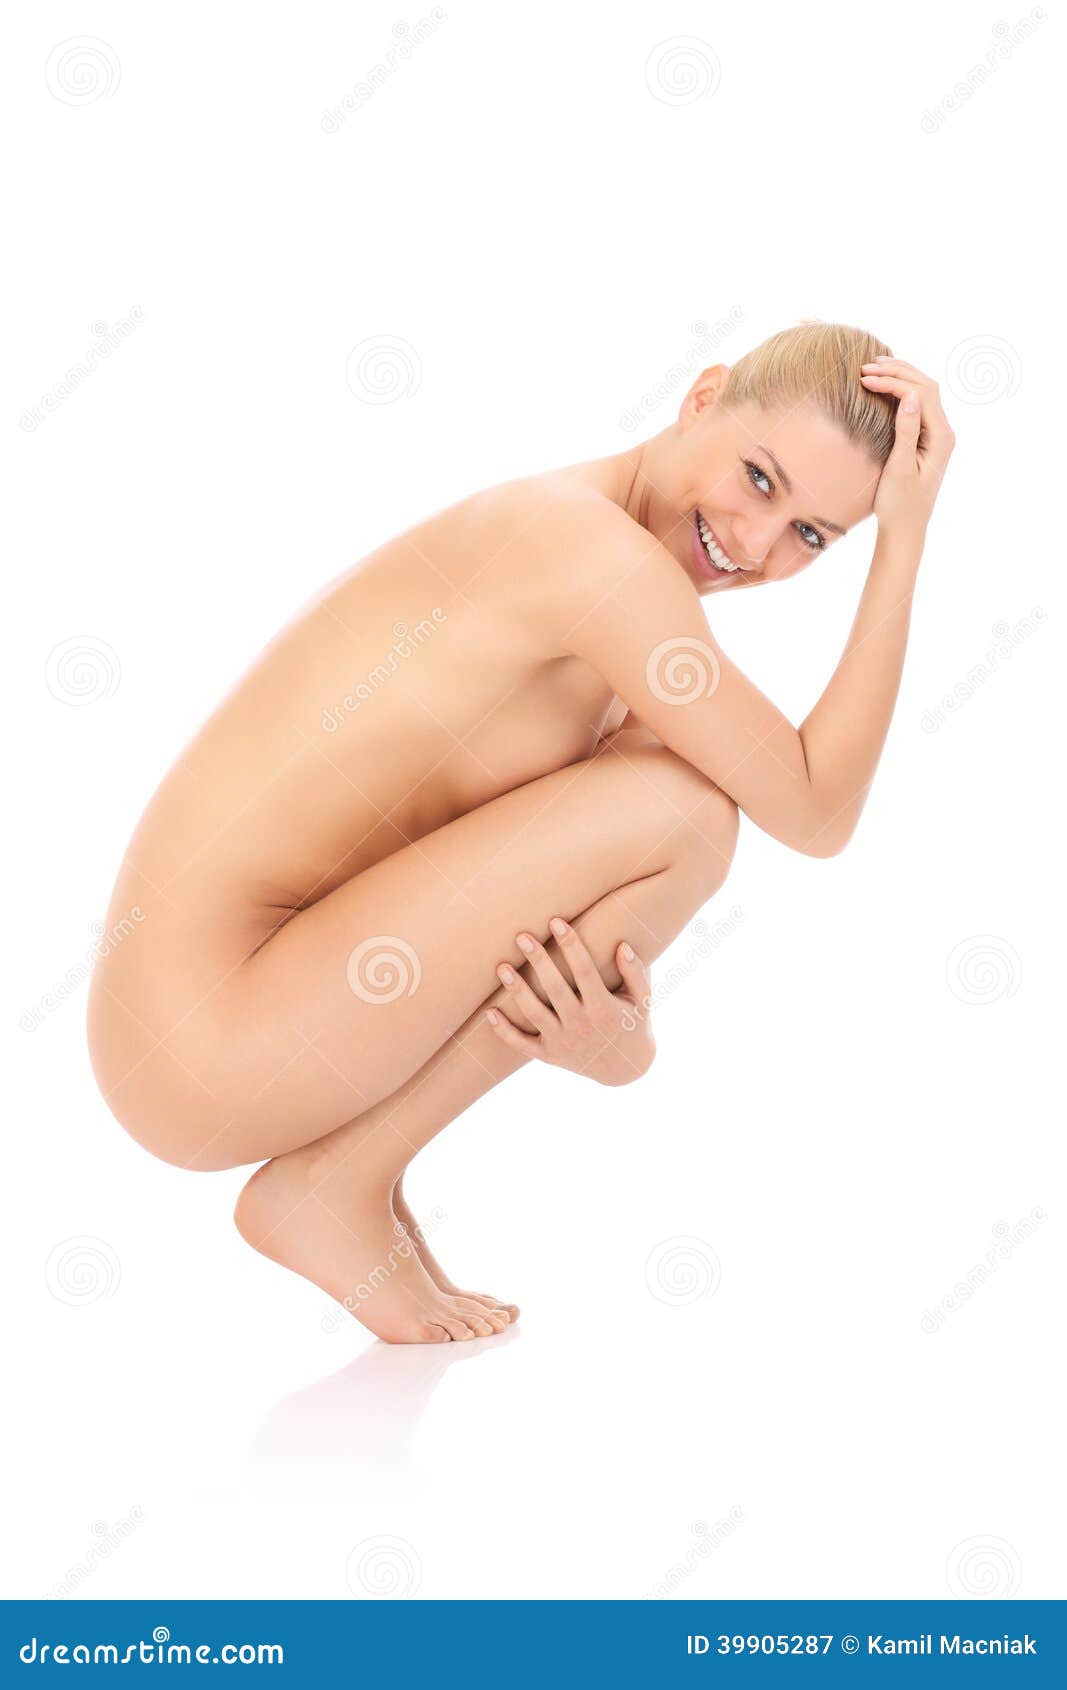 Nude girl squats